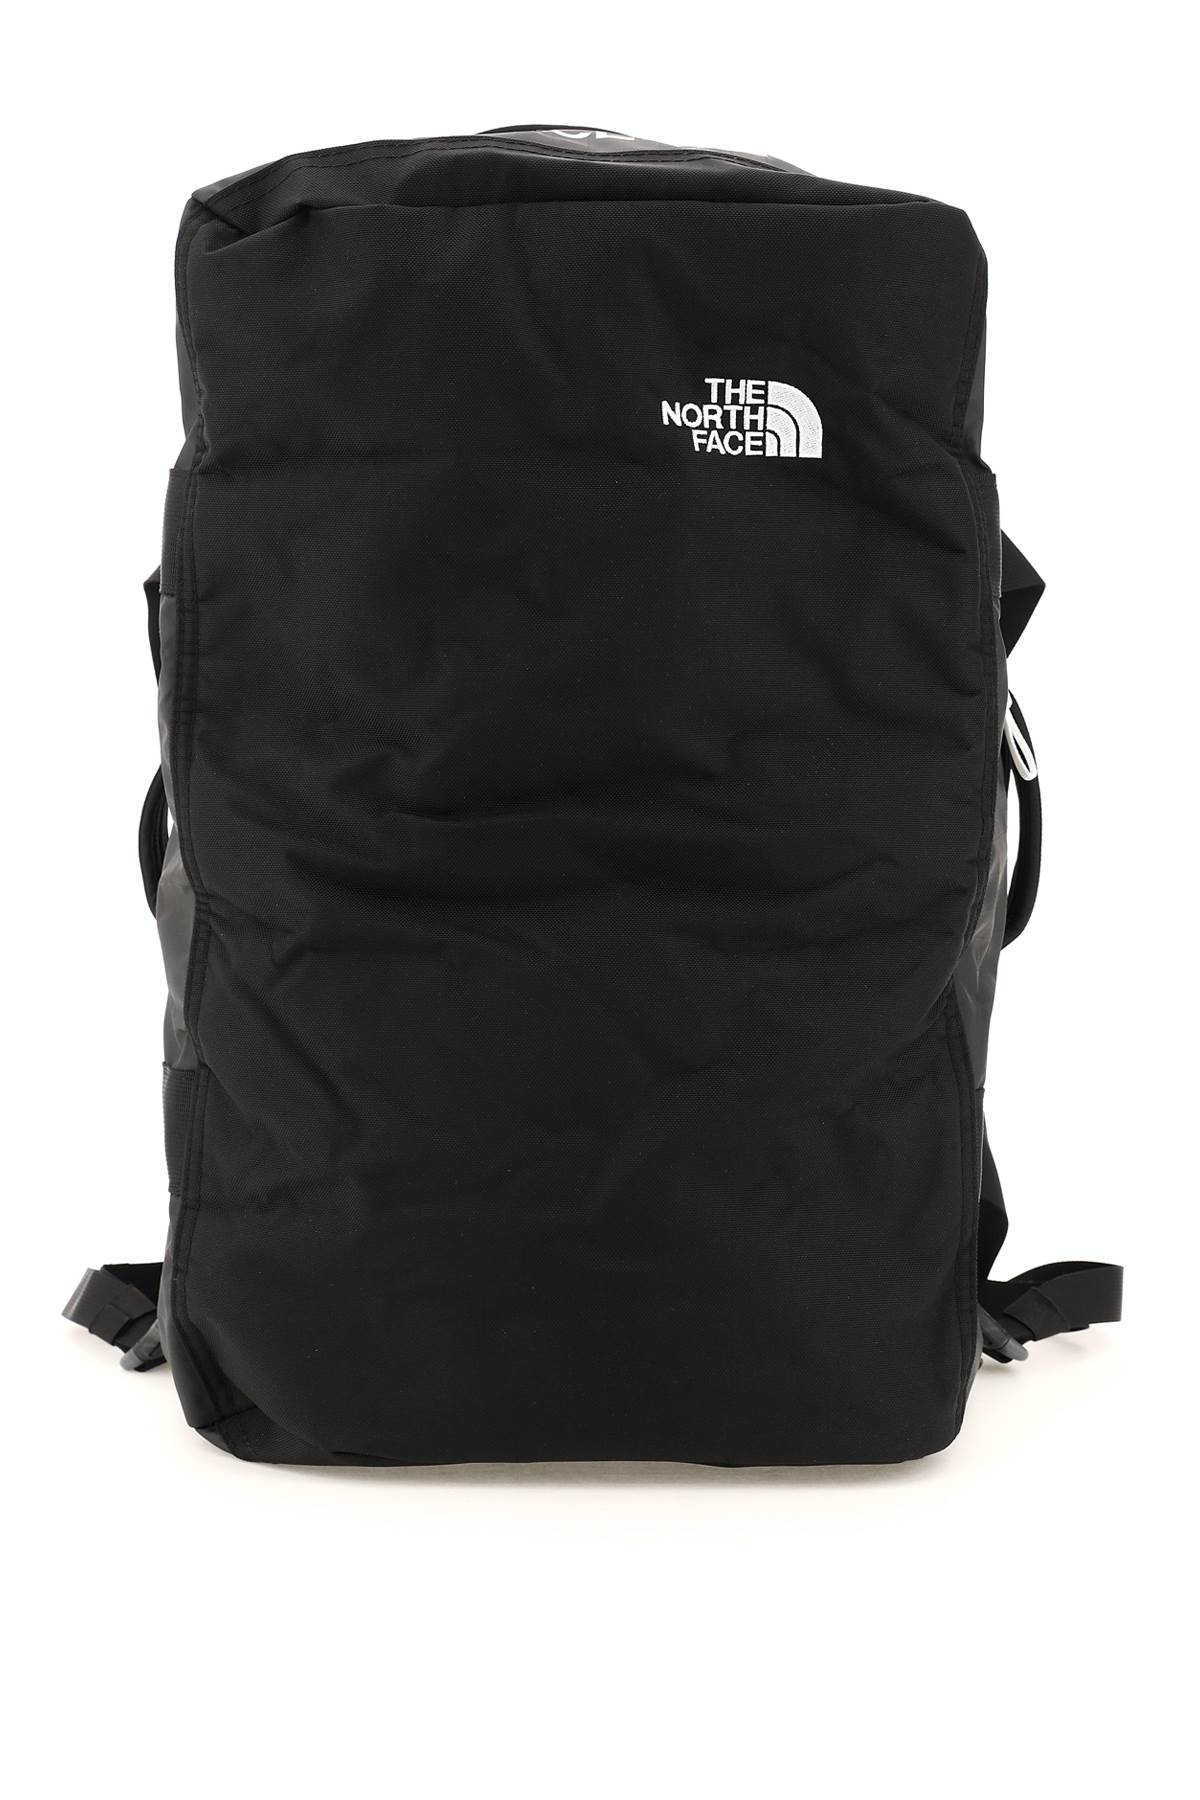 The North Face Base Camp Voyager Medium Duffel 42l